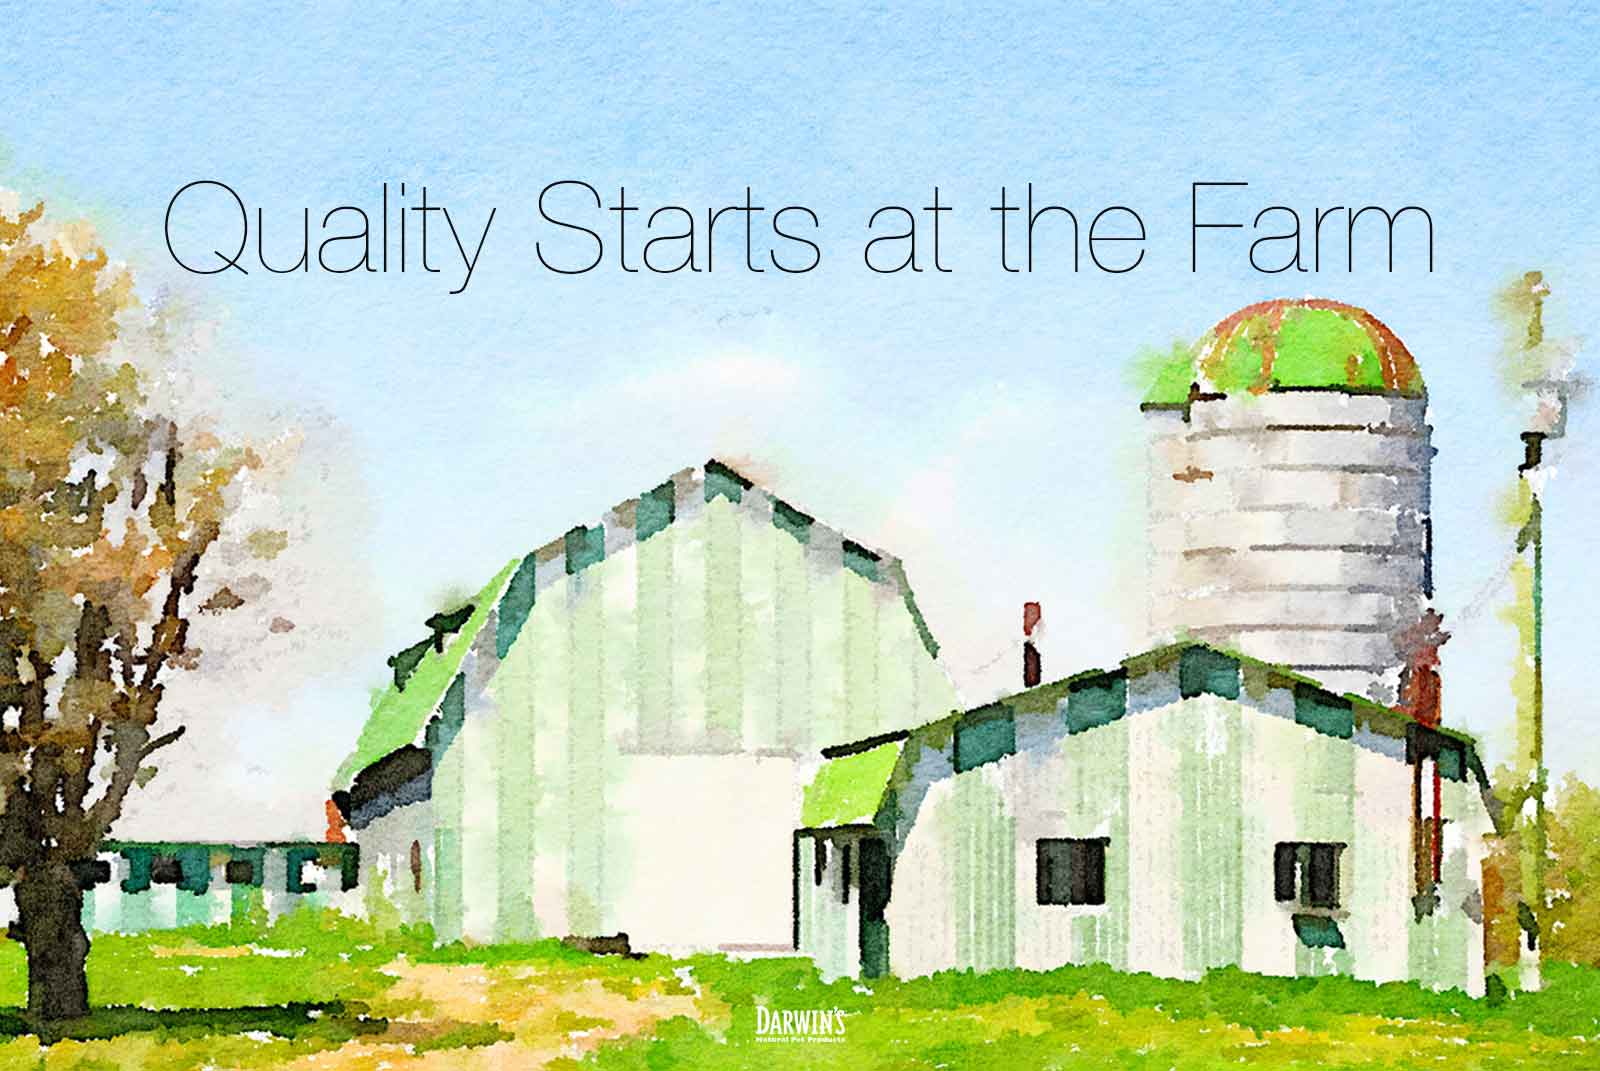 Quality Starts at the Farms